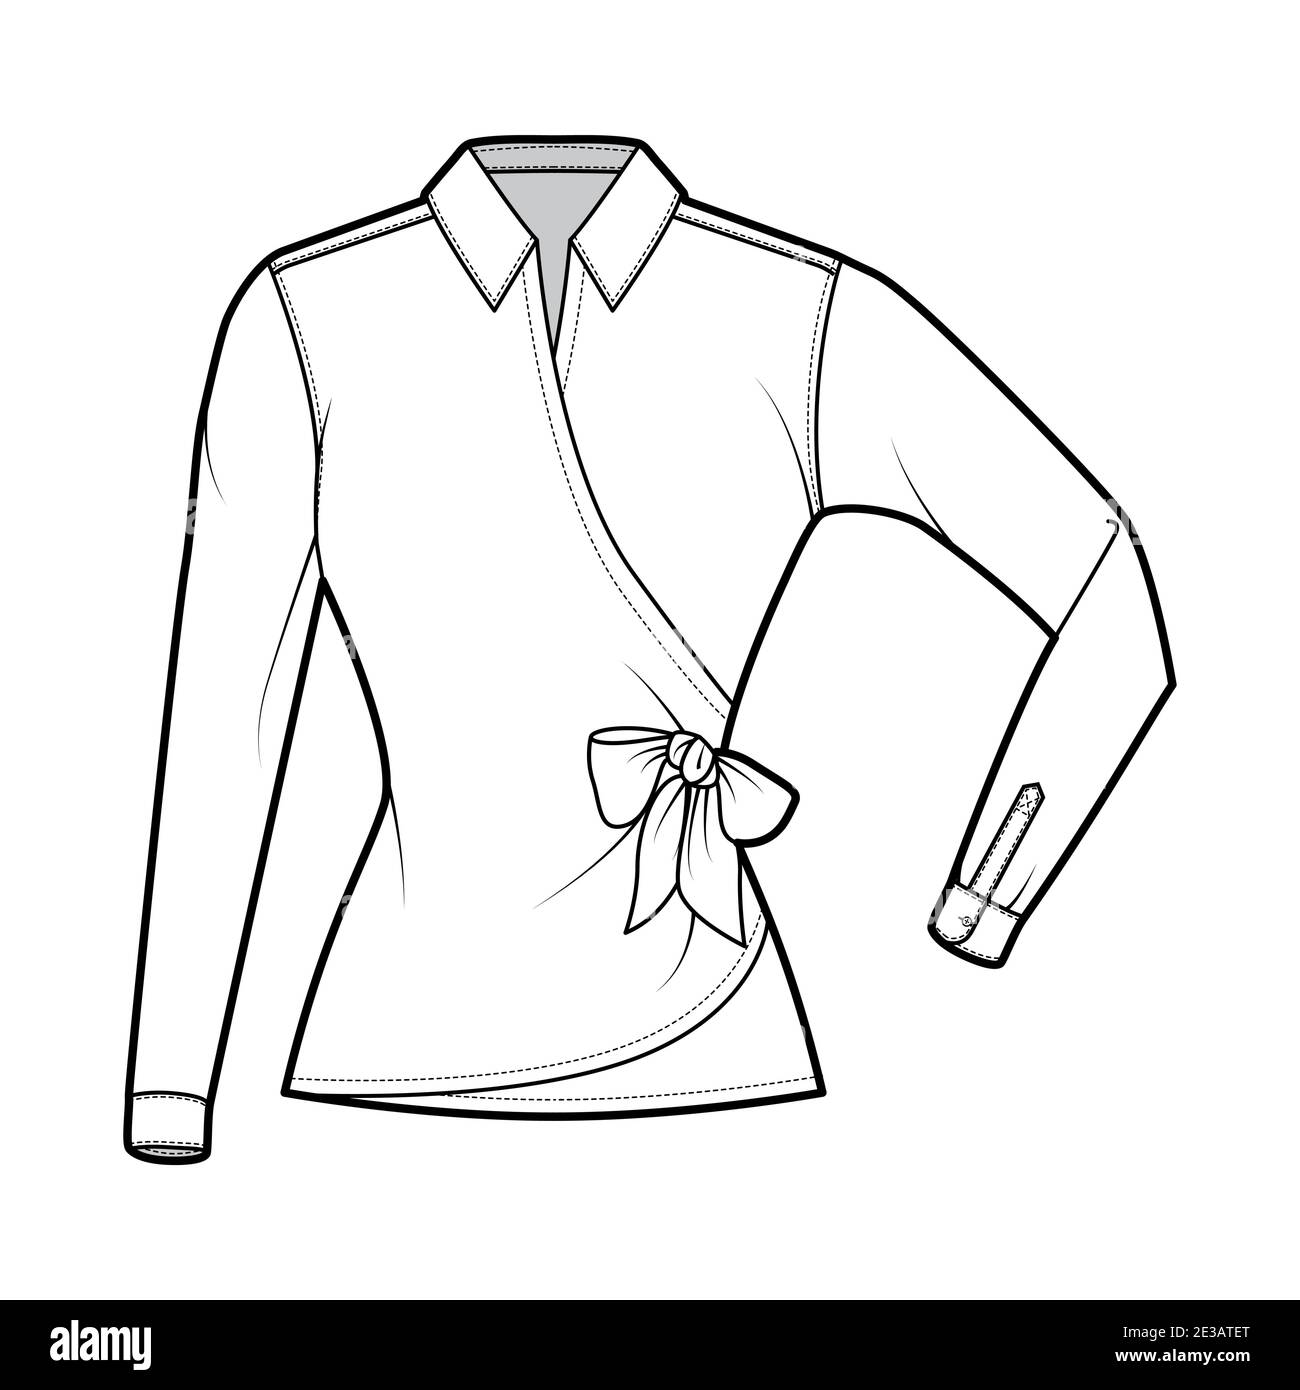 Shirt wrap technical fashion illustration with bow tie closure, elbow  folded long sleeves, classic collar, fitted